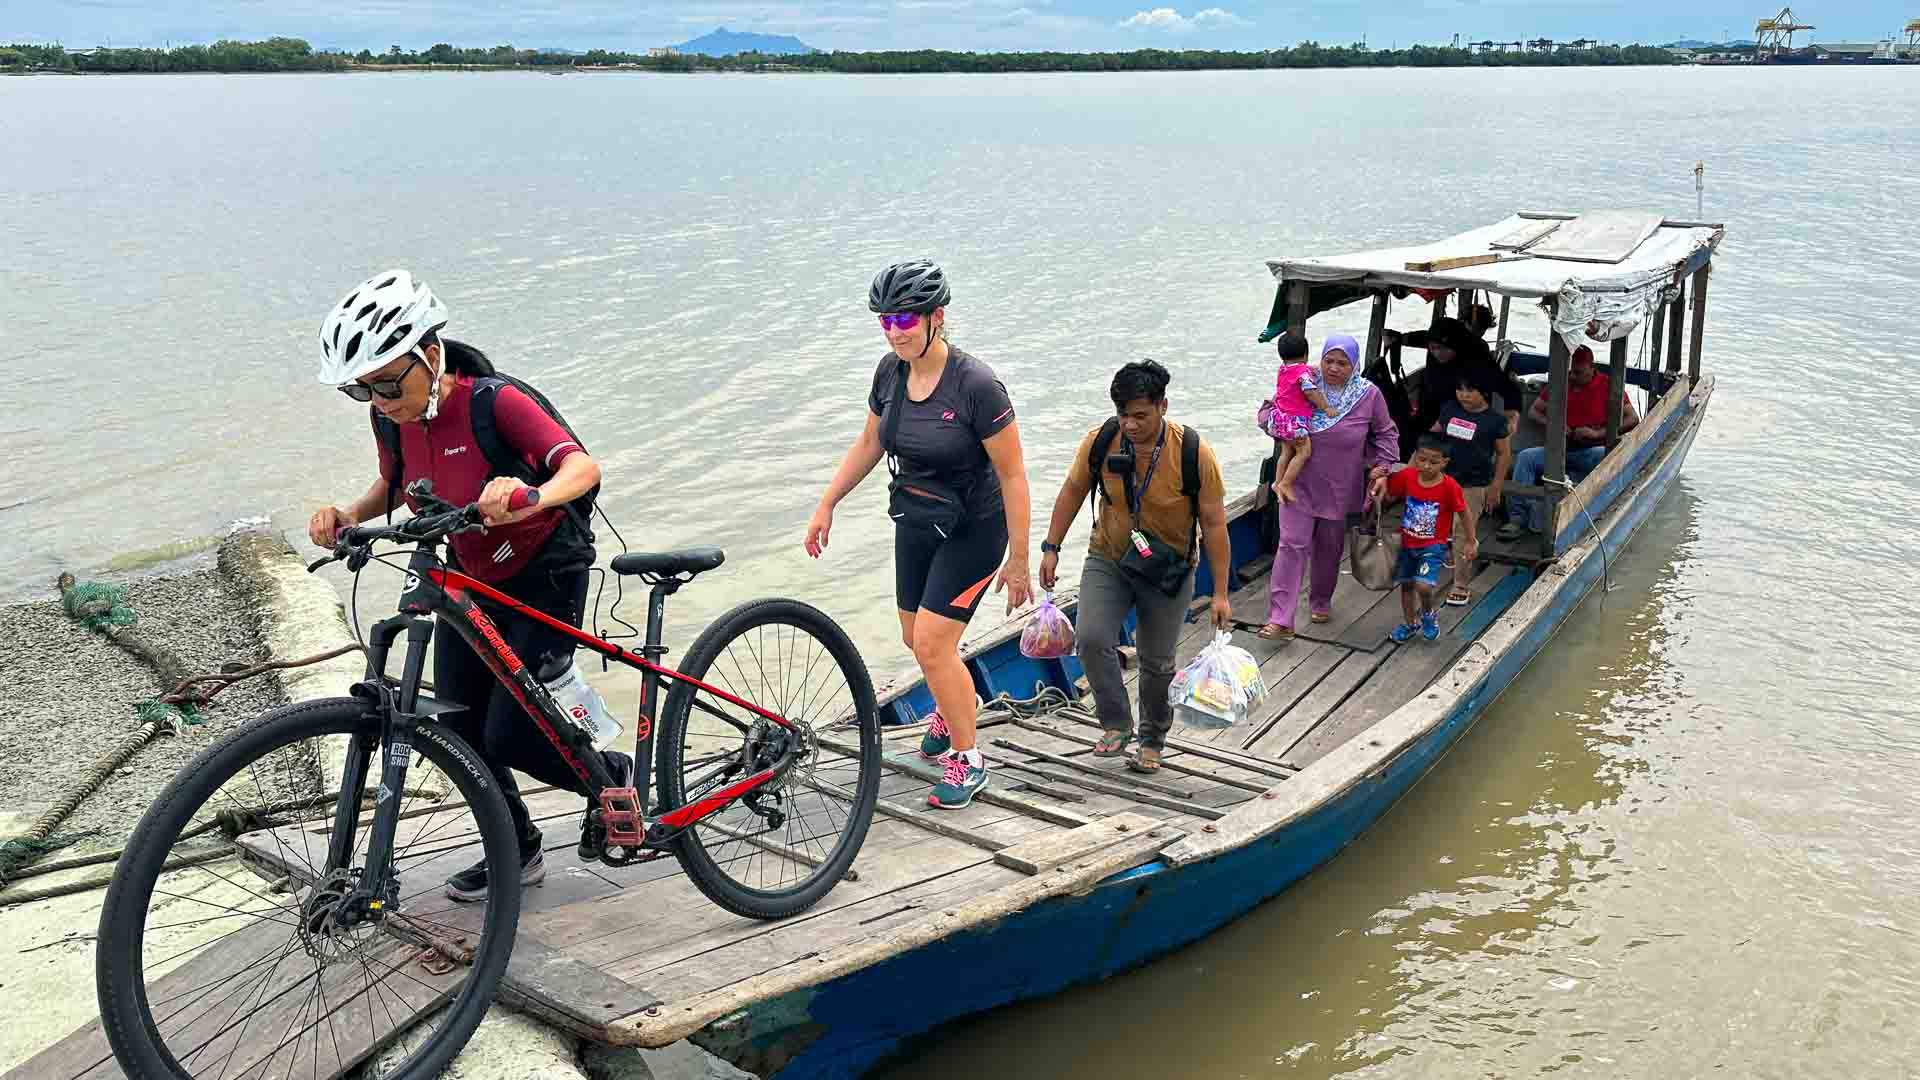 Boat with cyclists and bike unloading